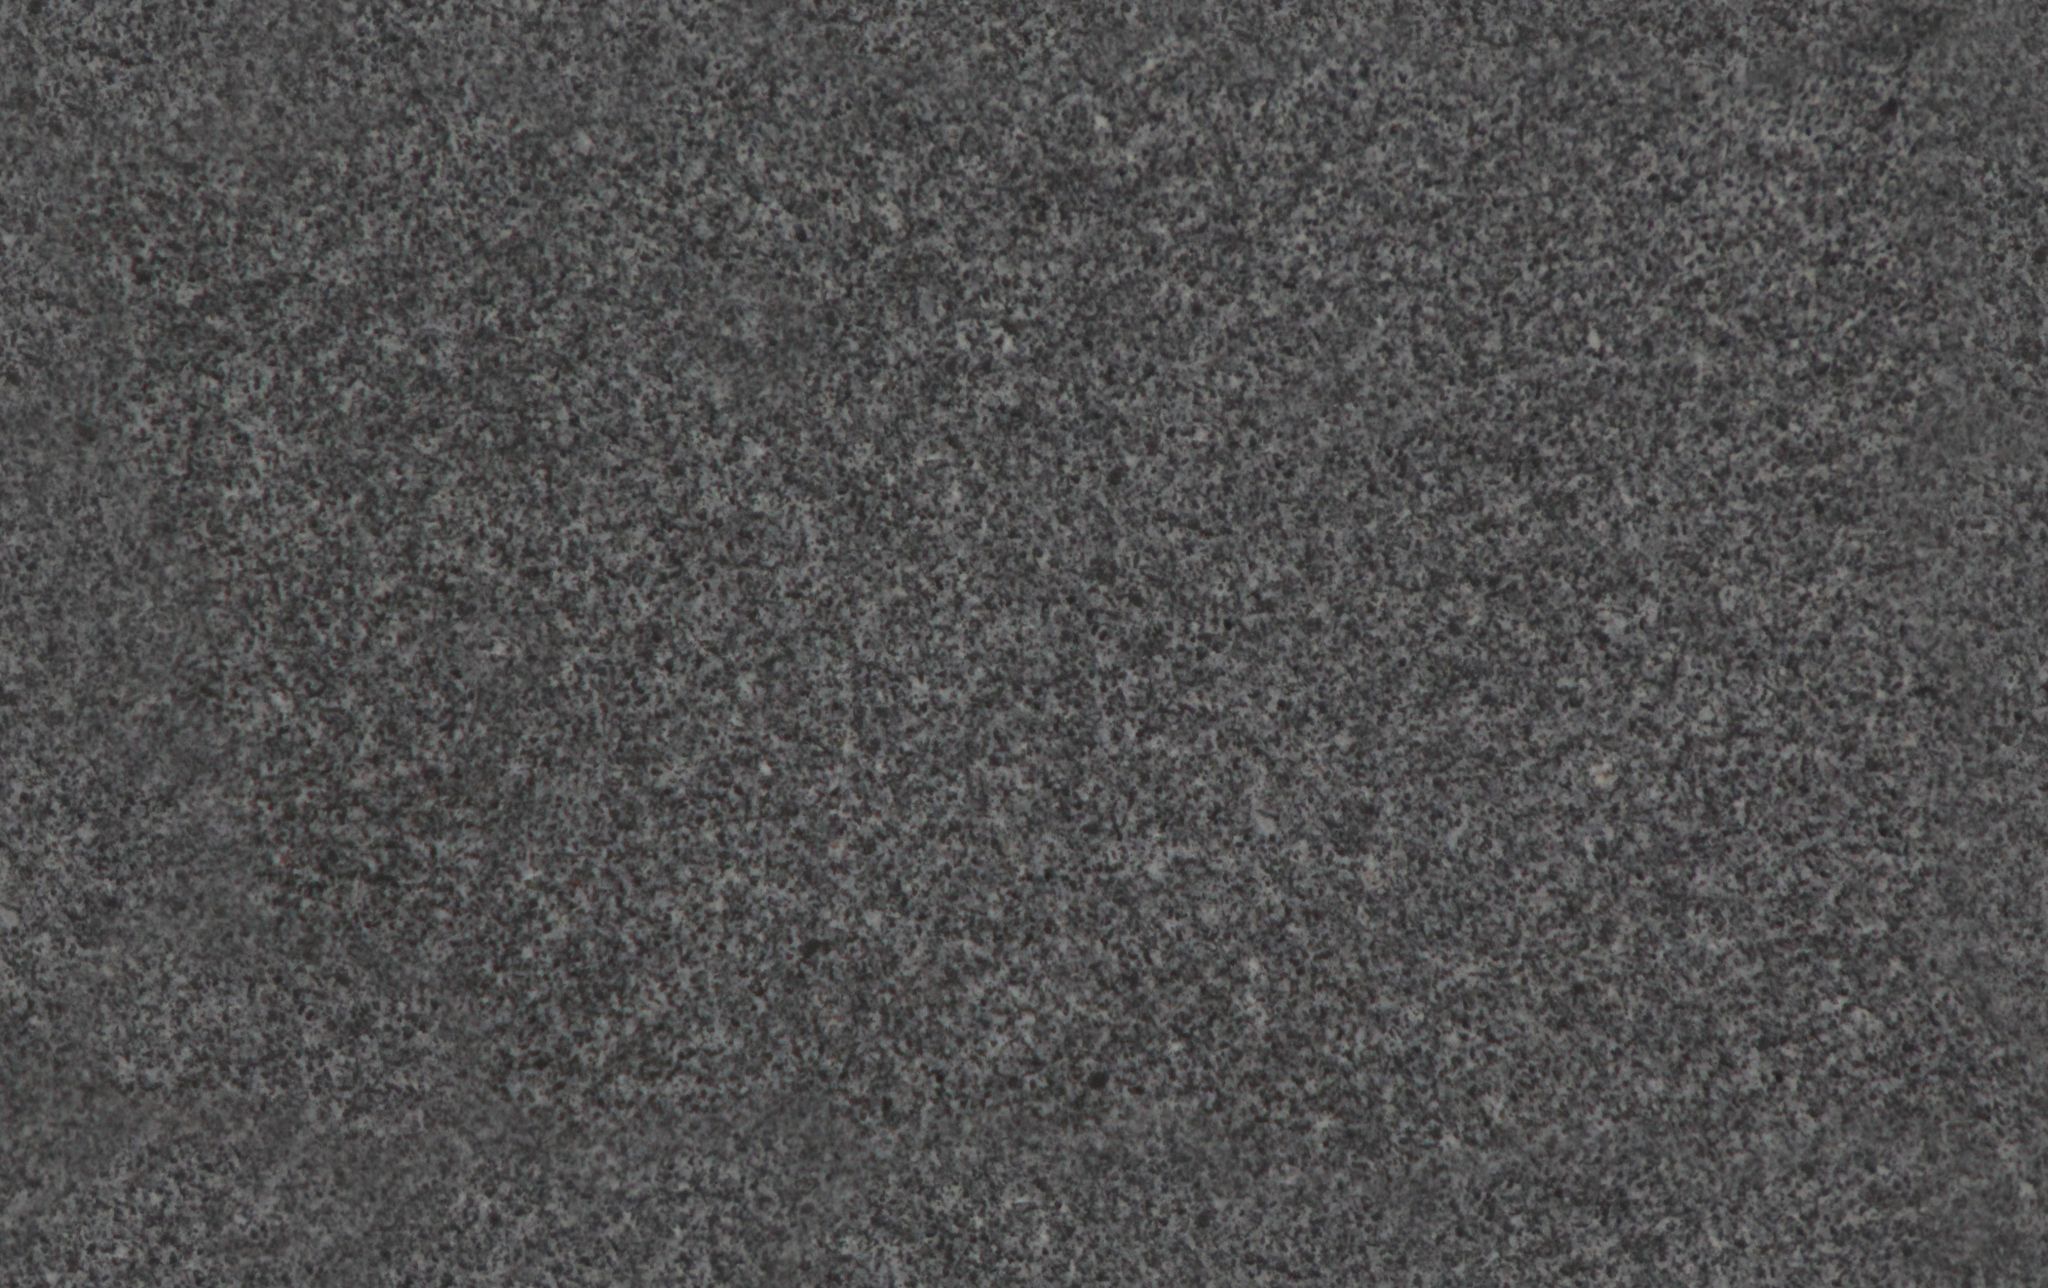 Granite Texture - Gray and White - Seamless Texture with normalmap ...